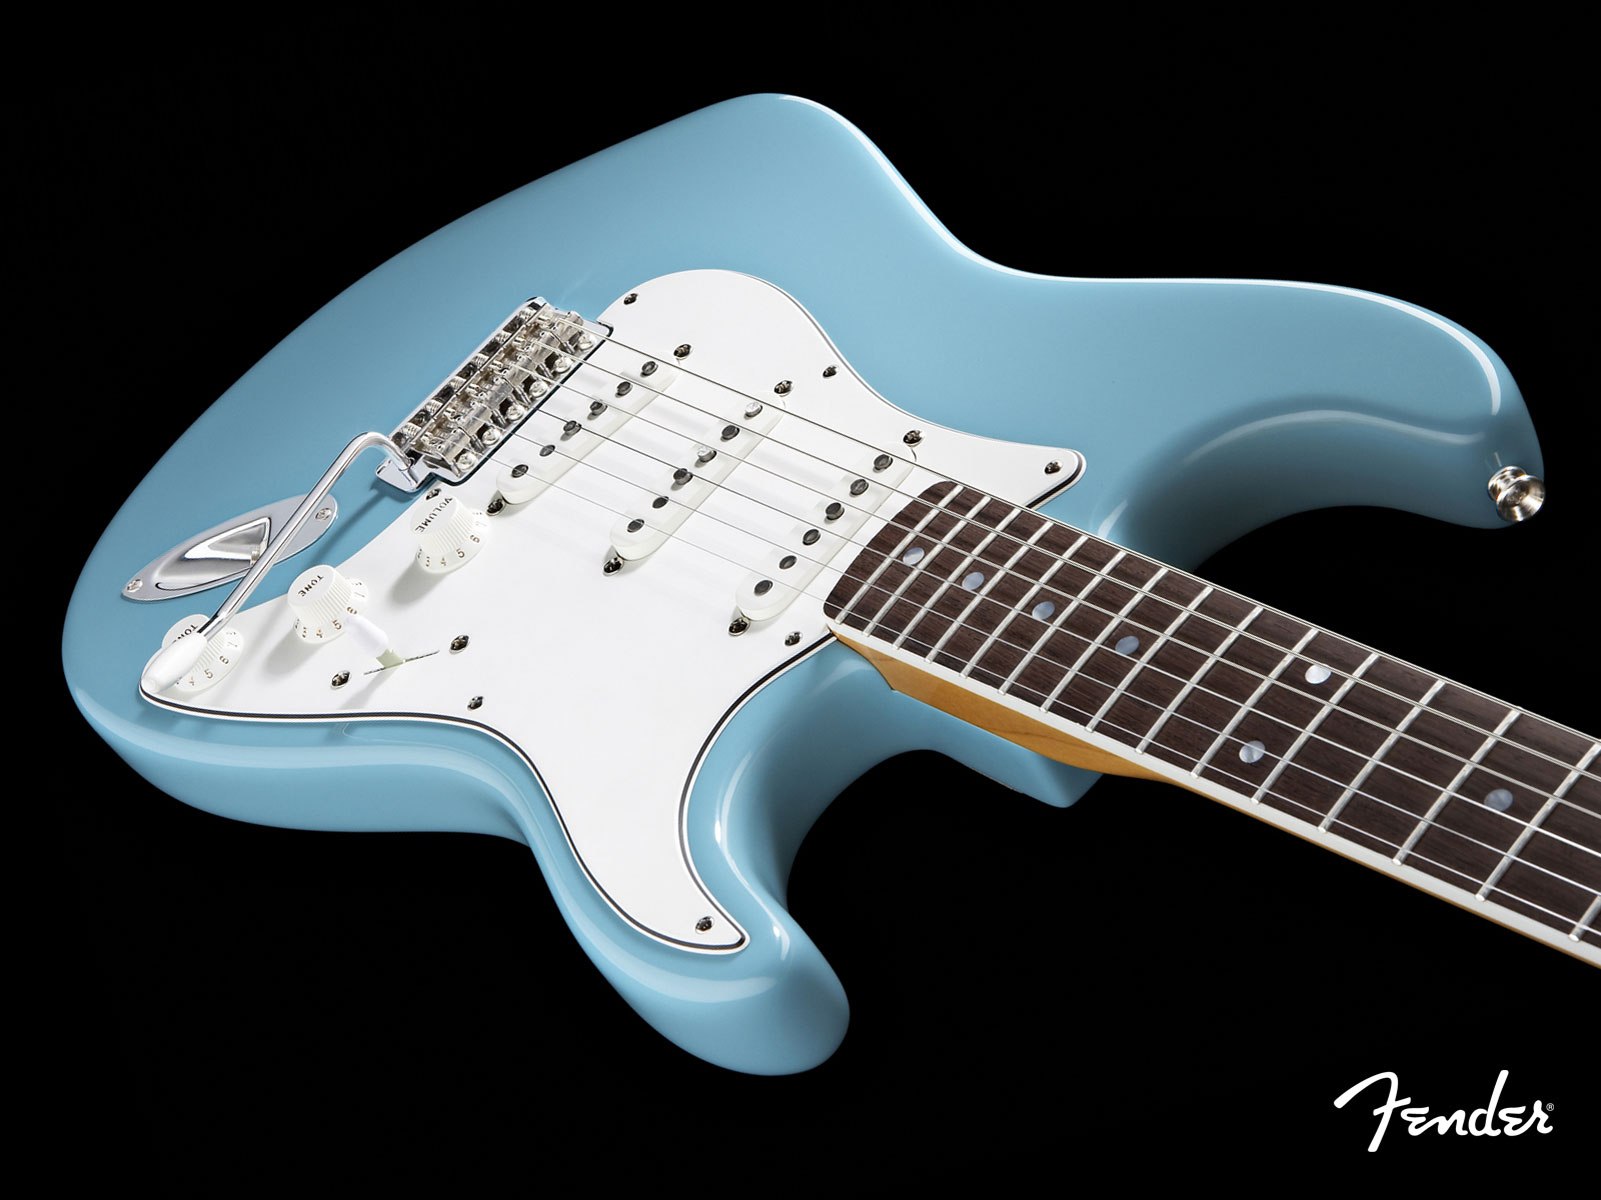 Fender Stratocaster Model High Quality And Resolution